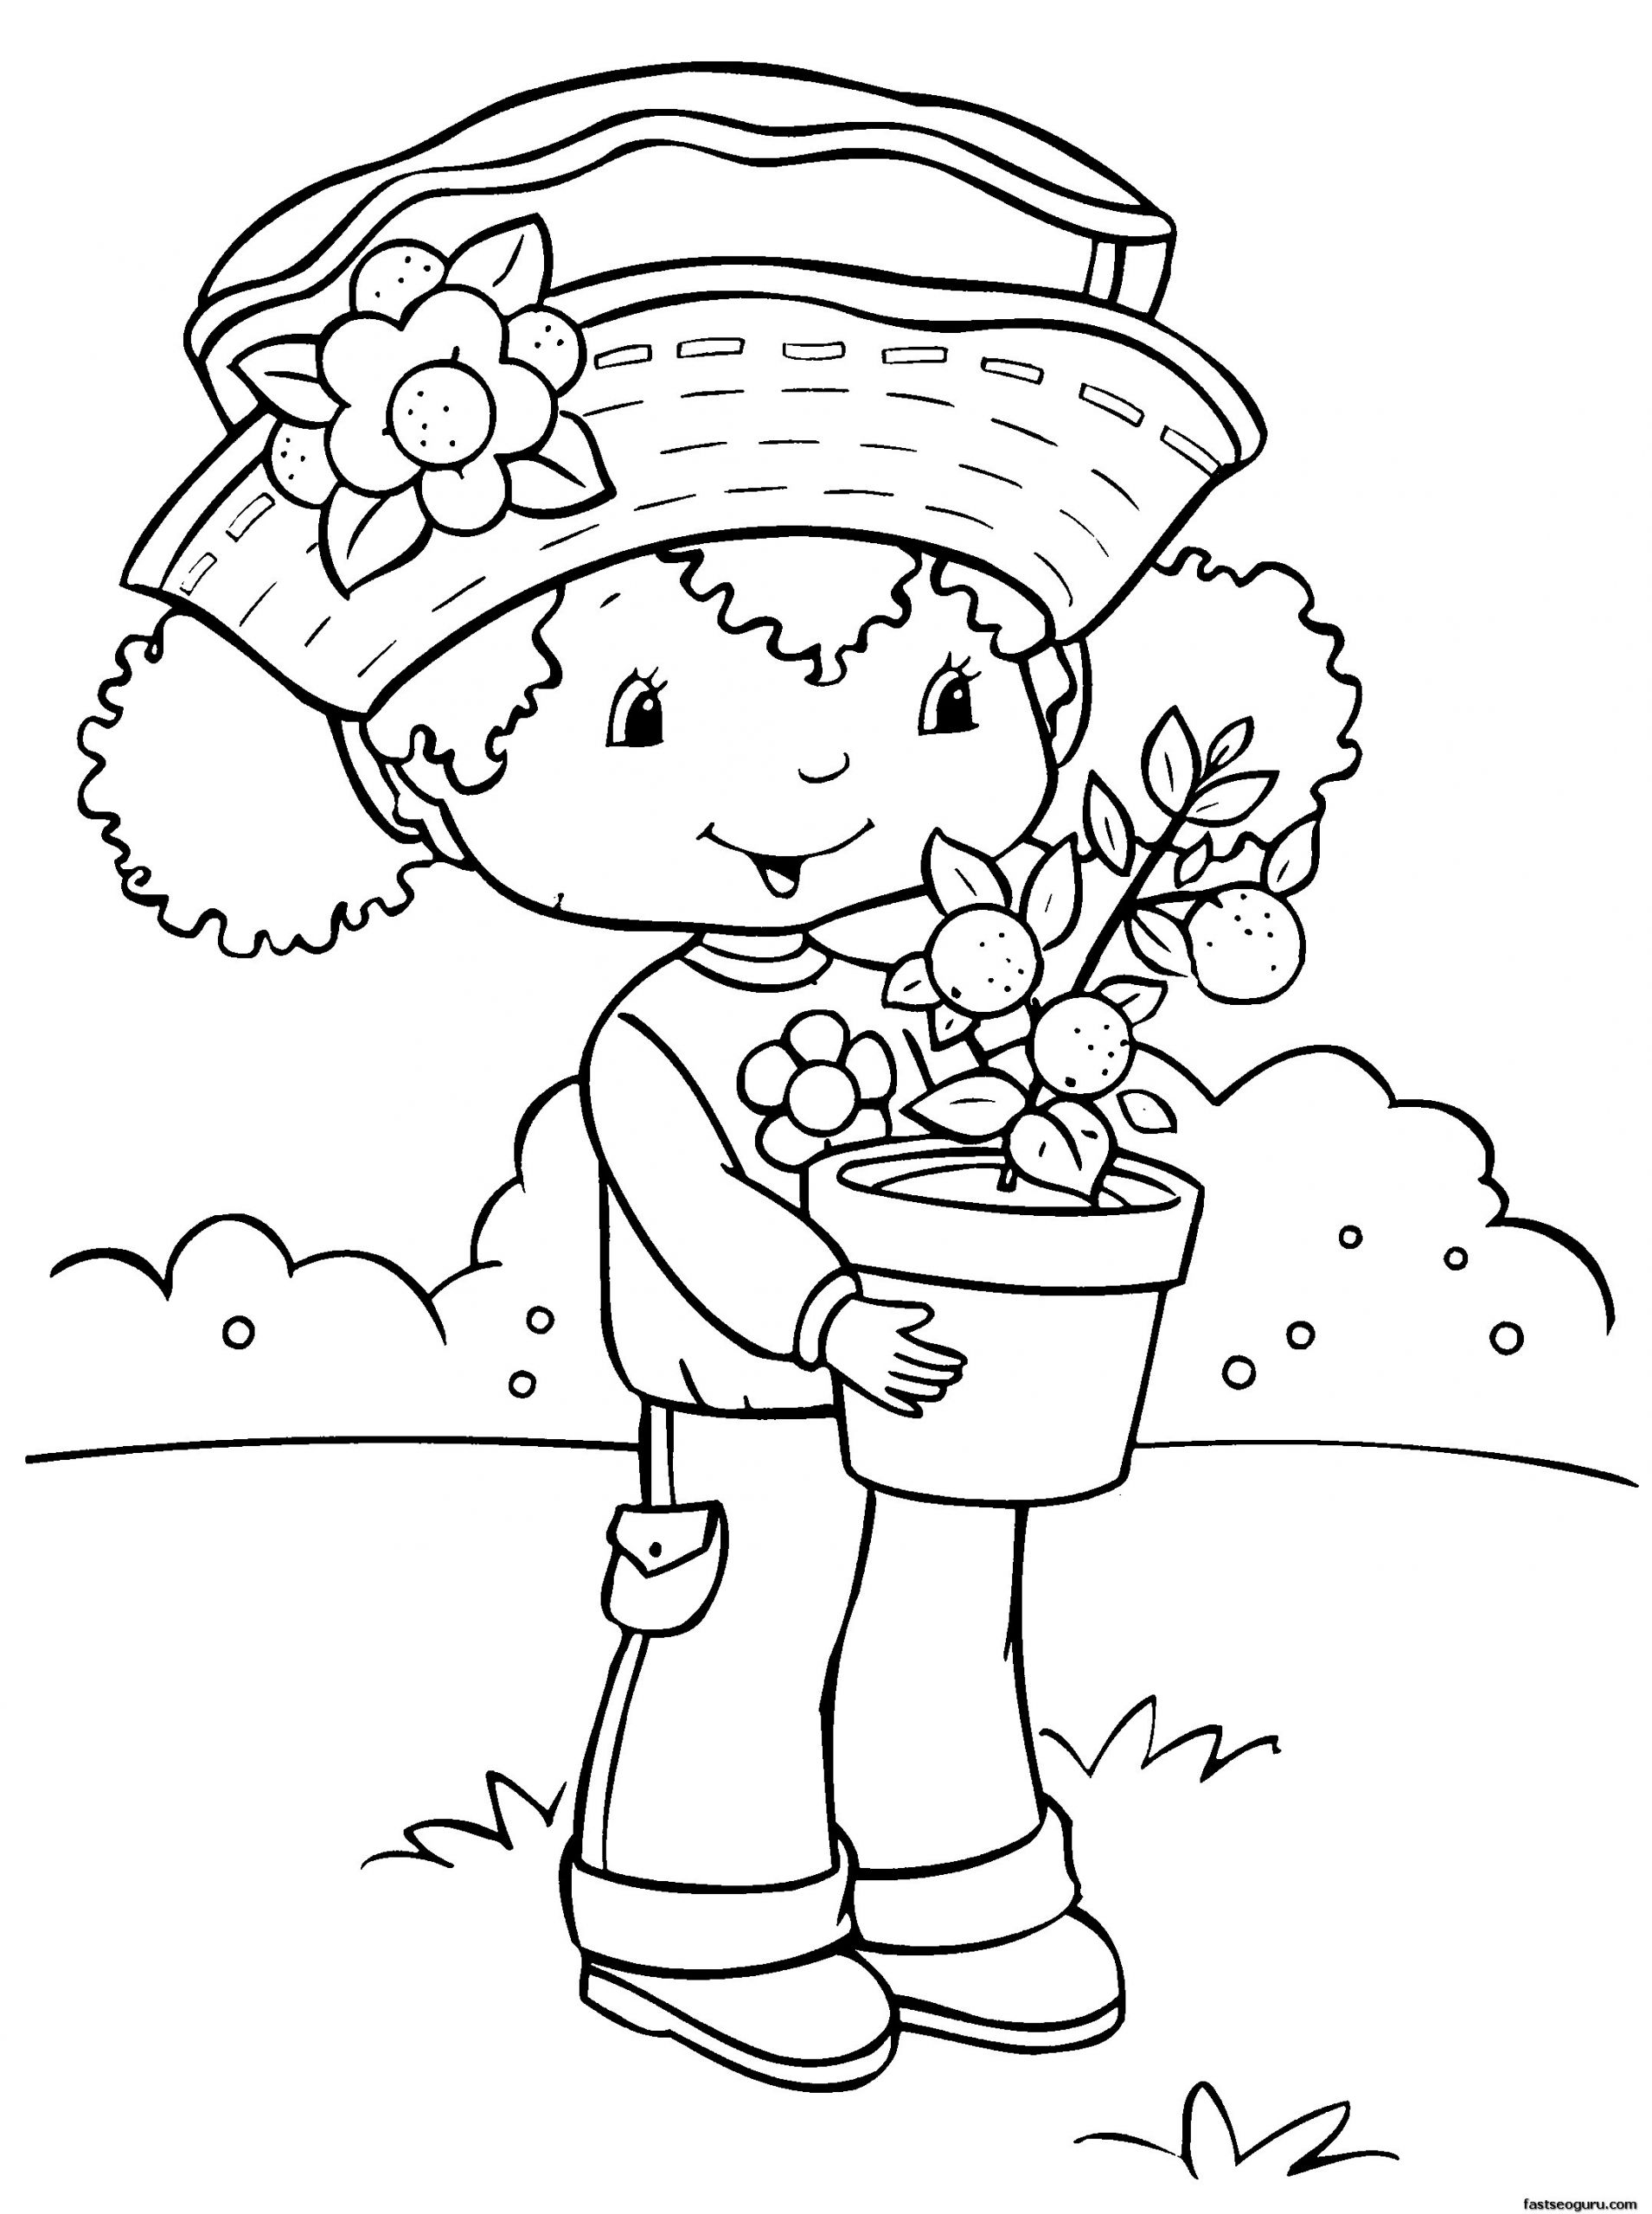 Free Printable Coloring Pages For Girls
 Printable cartoon Strawberry Shortcake coloring pages for